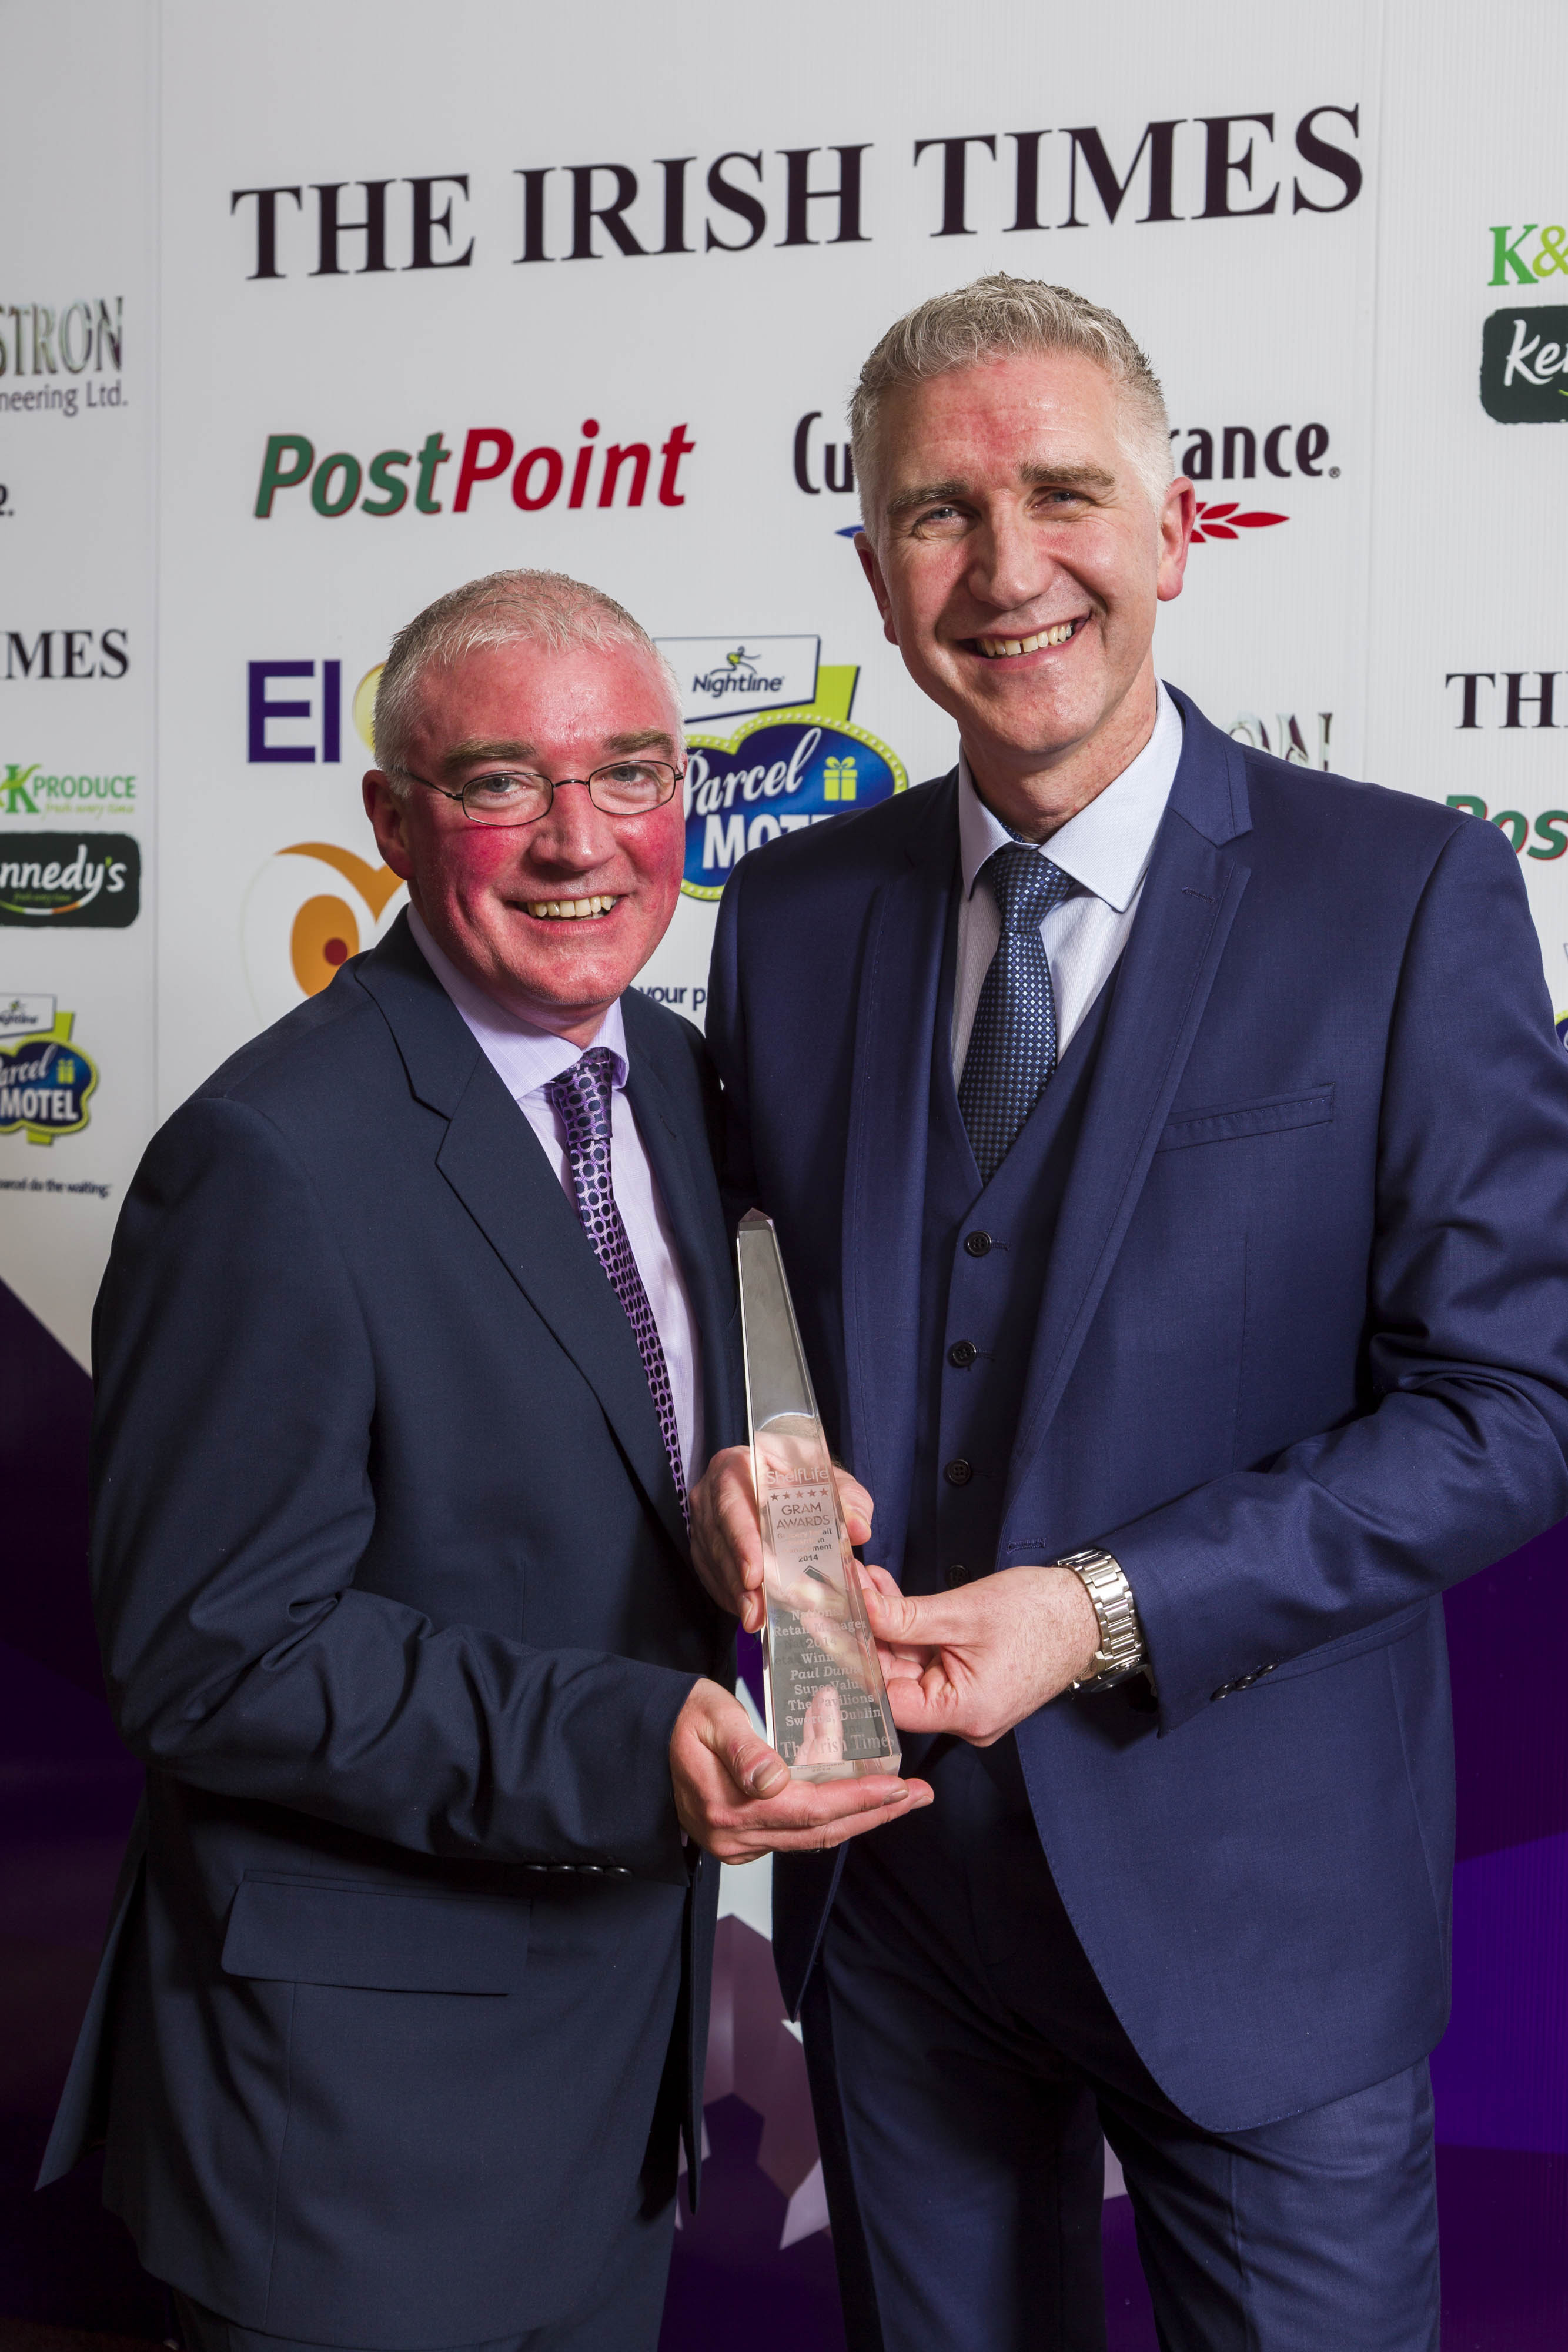 Fran Walsh, circulation and audience director, The Irish Times, presents the National Retail Manager 2014 Award to Paul Dunne of Superquinn, the Pavilions Shopping Centre, Swords, Co. Dublin